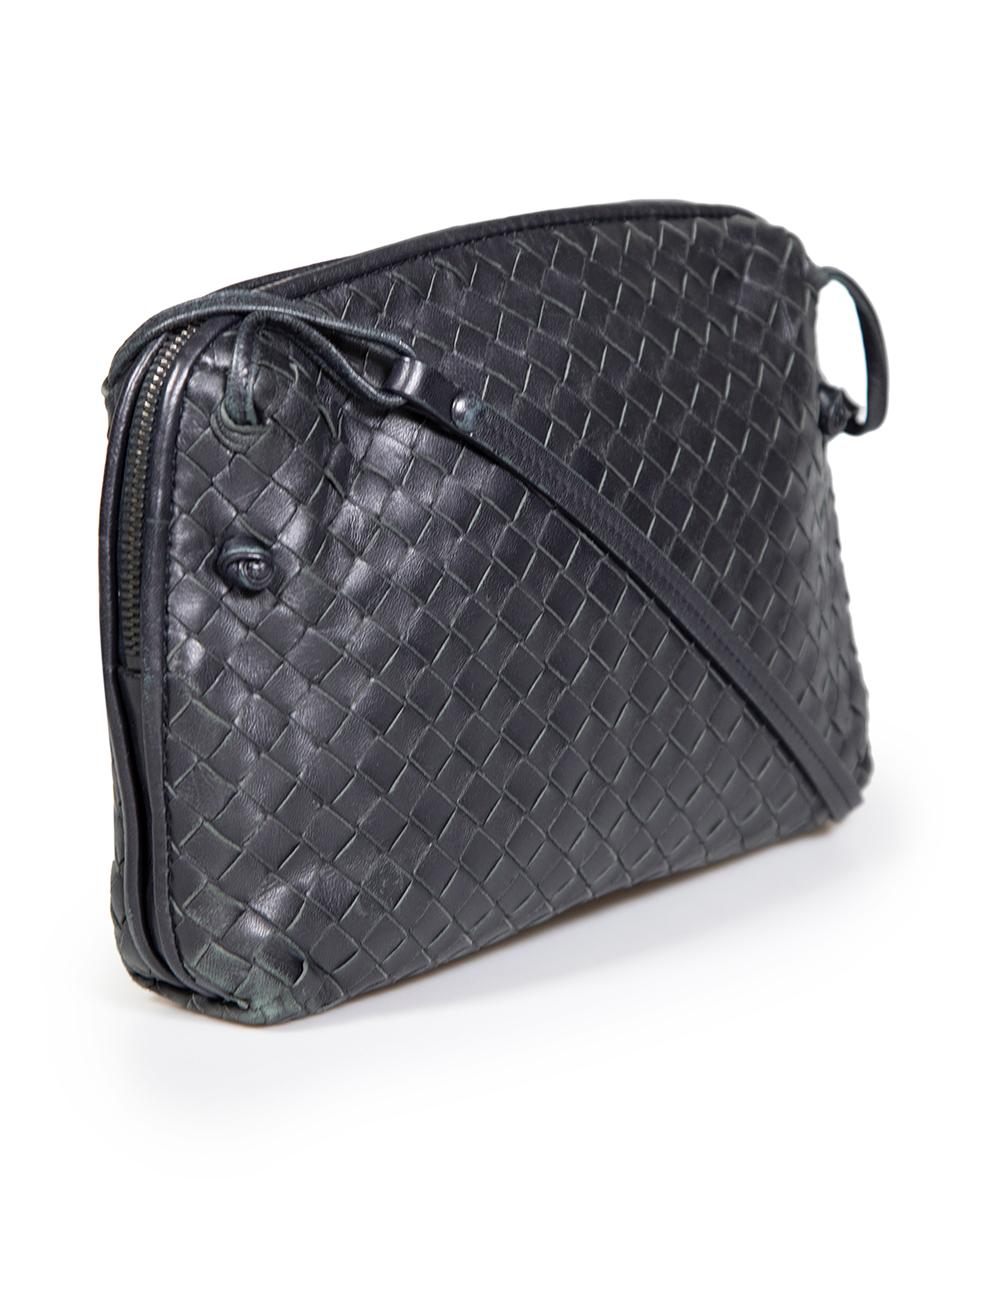 CONDITION is Good. General wear to bag is evident. Moderate signs of wear to all edges of the bag, including the woven leather edges, strap and base corners. There are marks to the lining of the bag at the base corners on this used Bottega Veneta